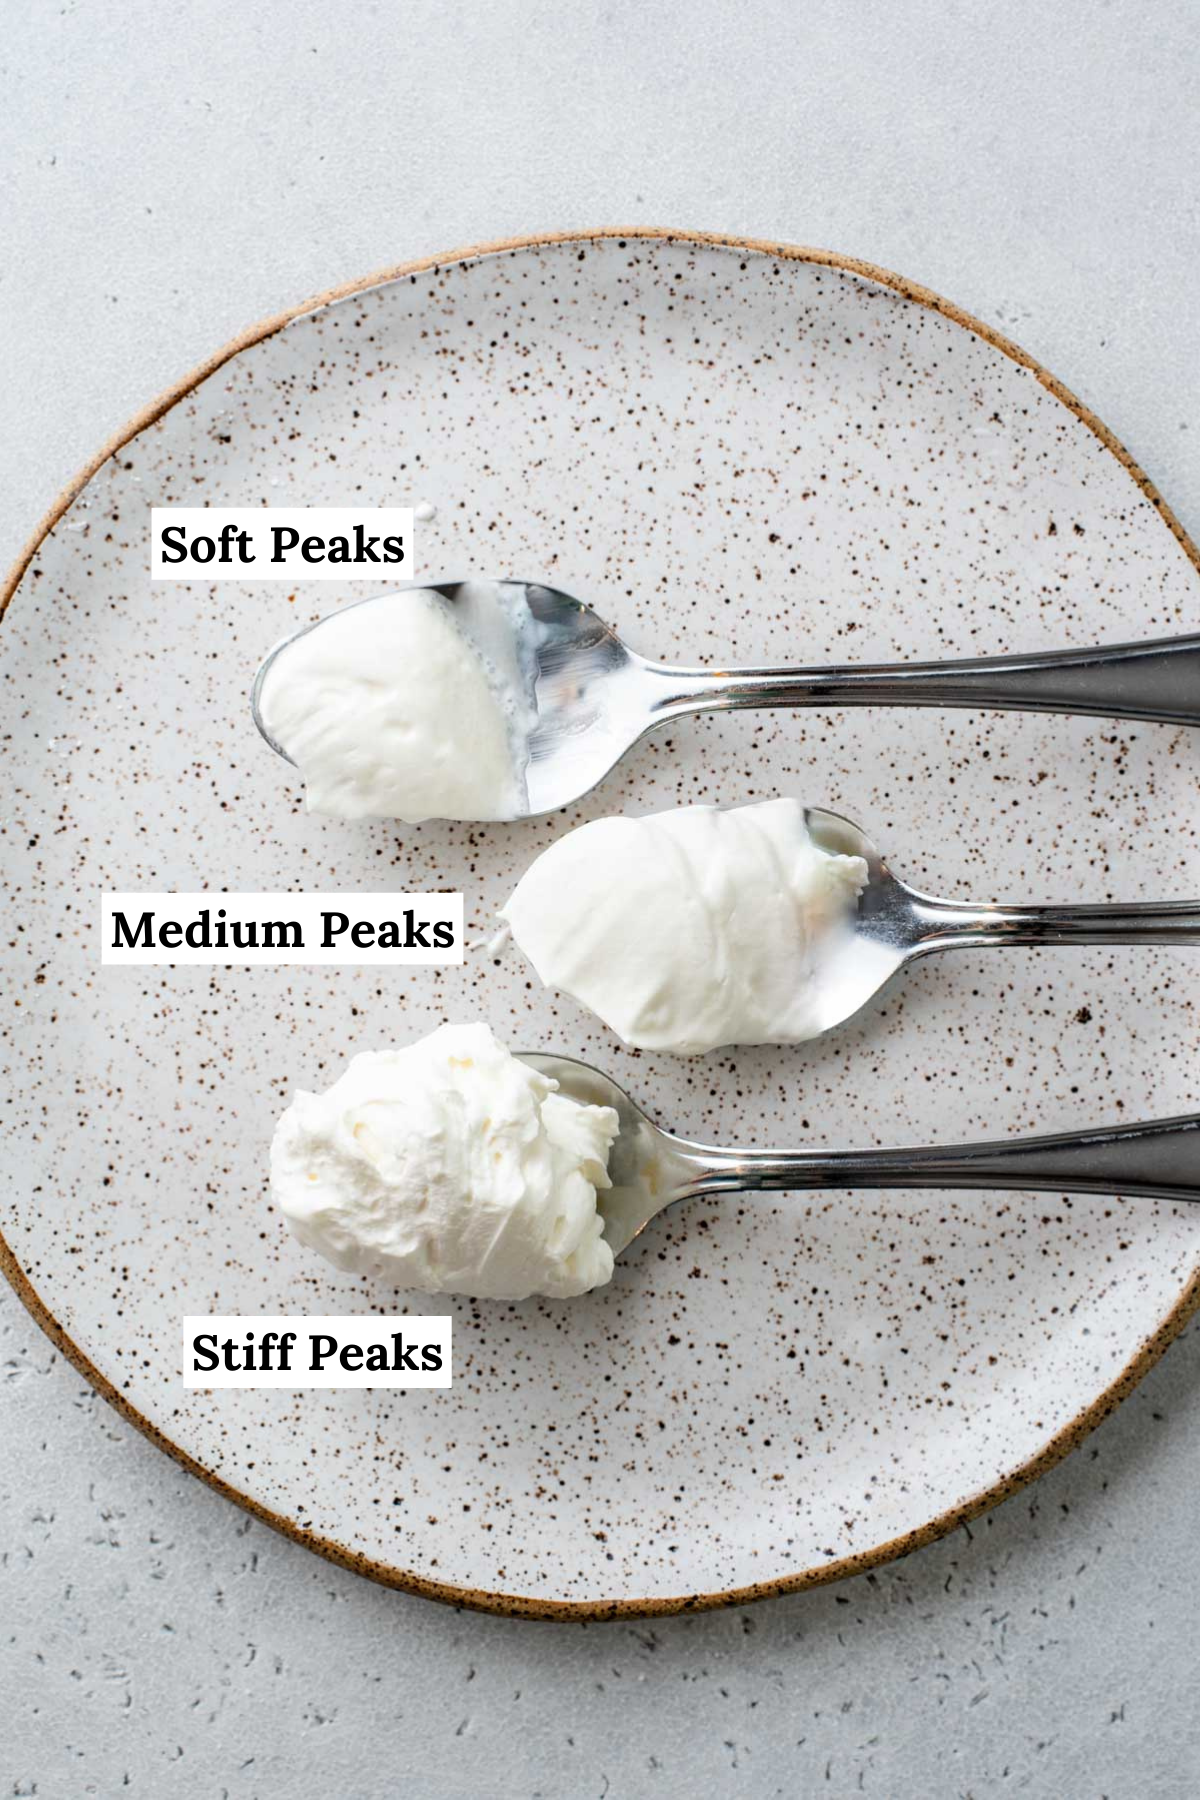 spoons of whipped cream on a plate with labels showing the different types of peaks: soft peaks, medium peaks, and stiff peaks